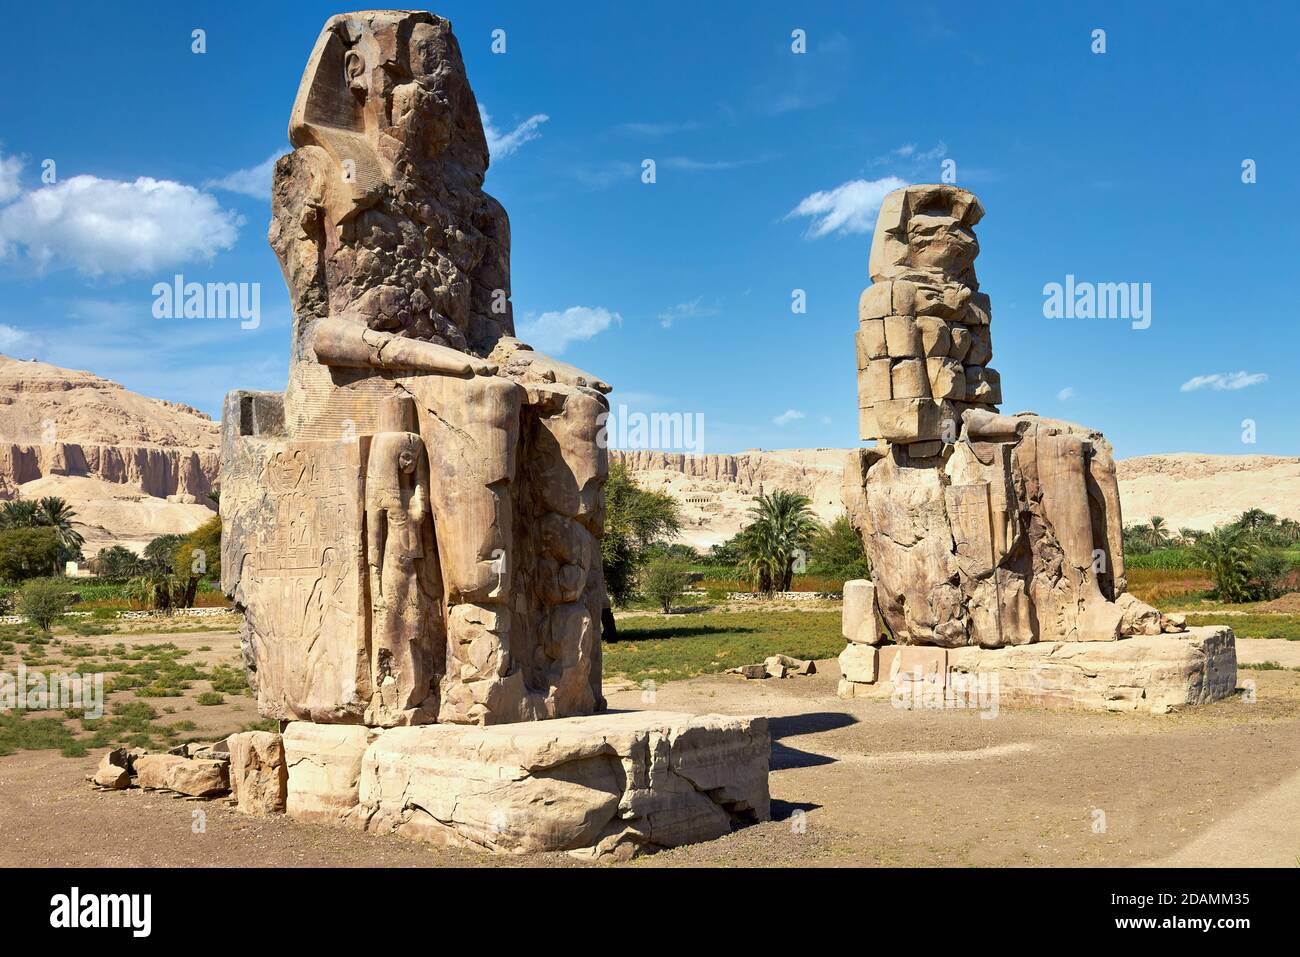 Giant stone statues of Pharaoh Amenhotep III near the Valley of the Kings, Luxor, Egypt Stock Photo